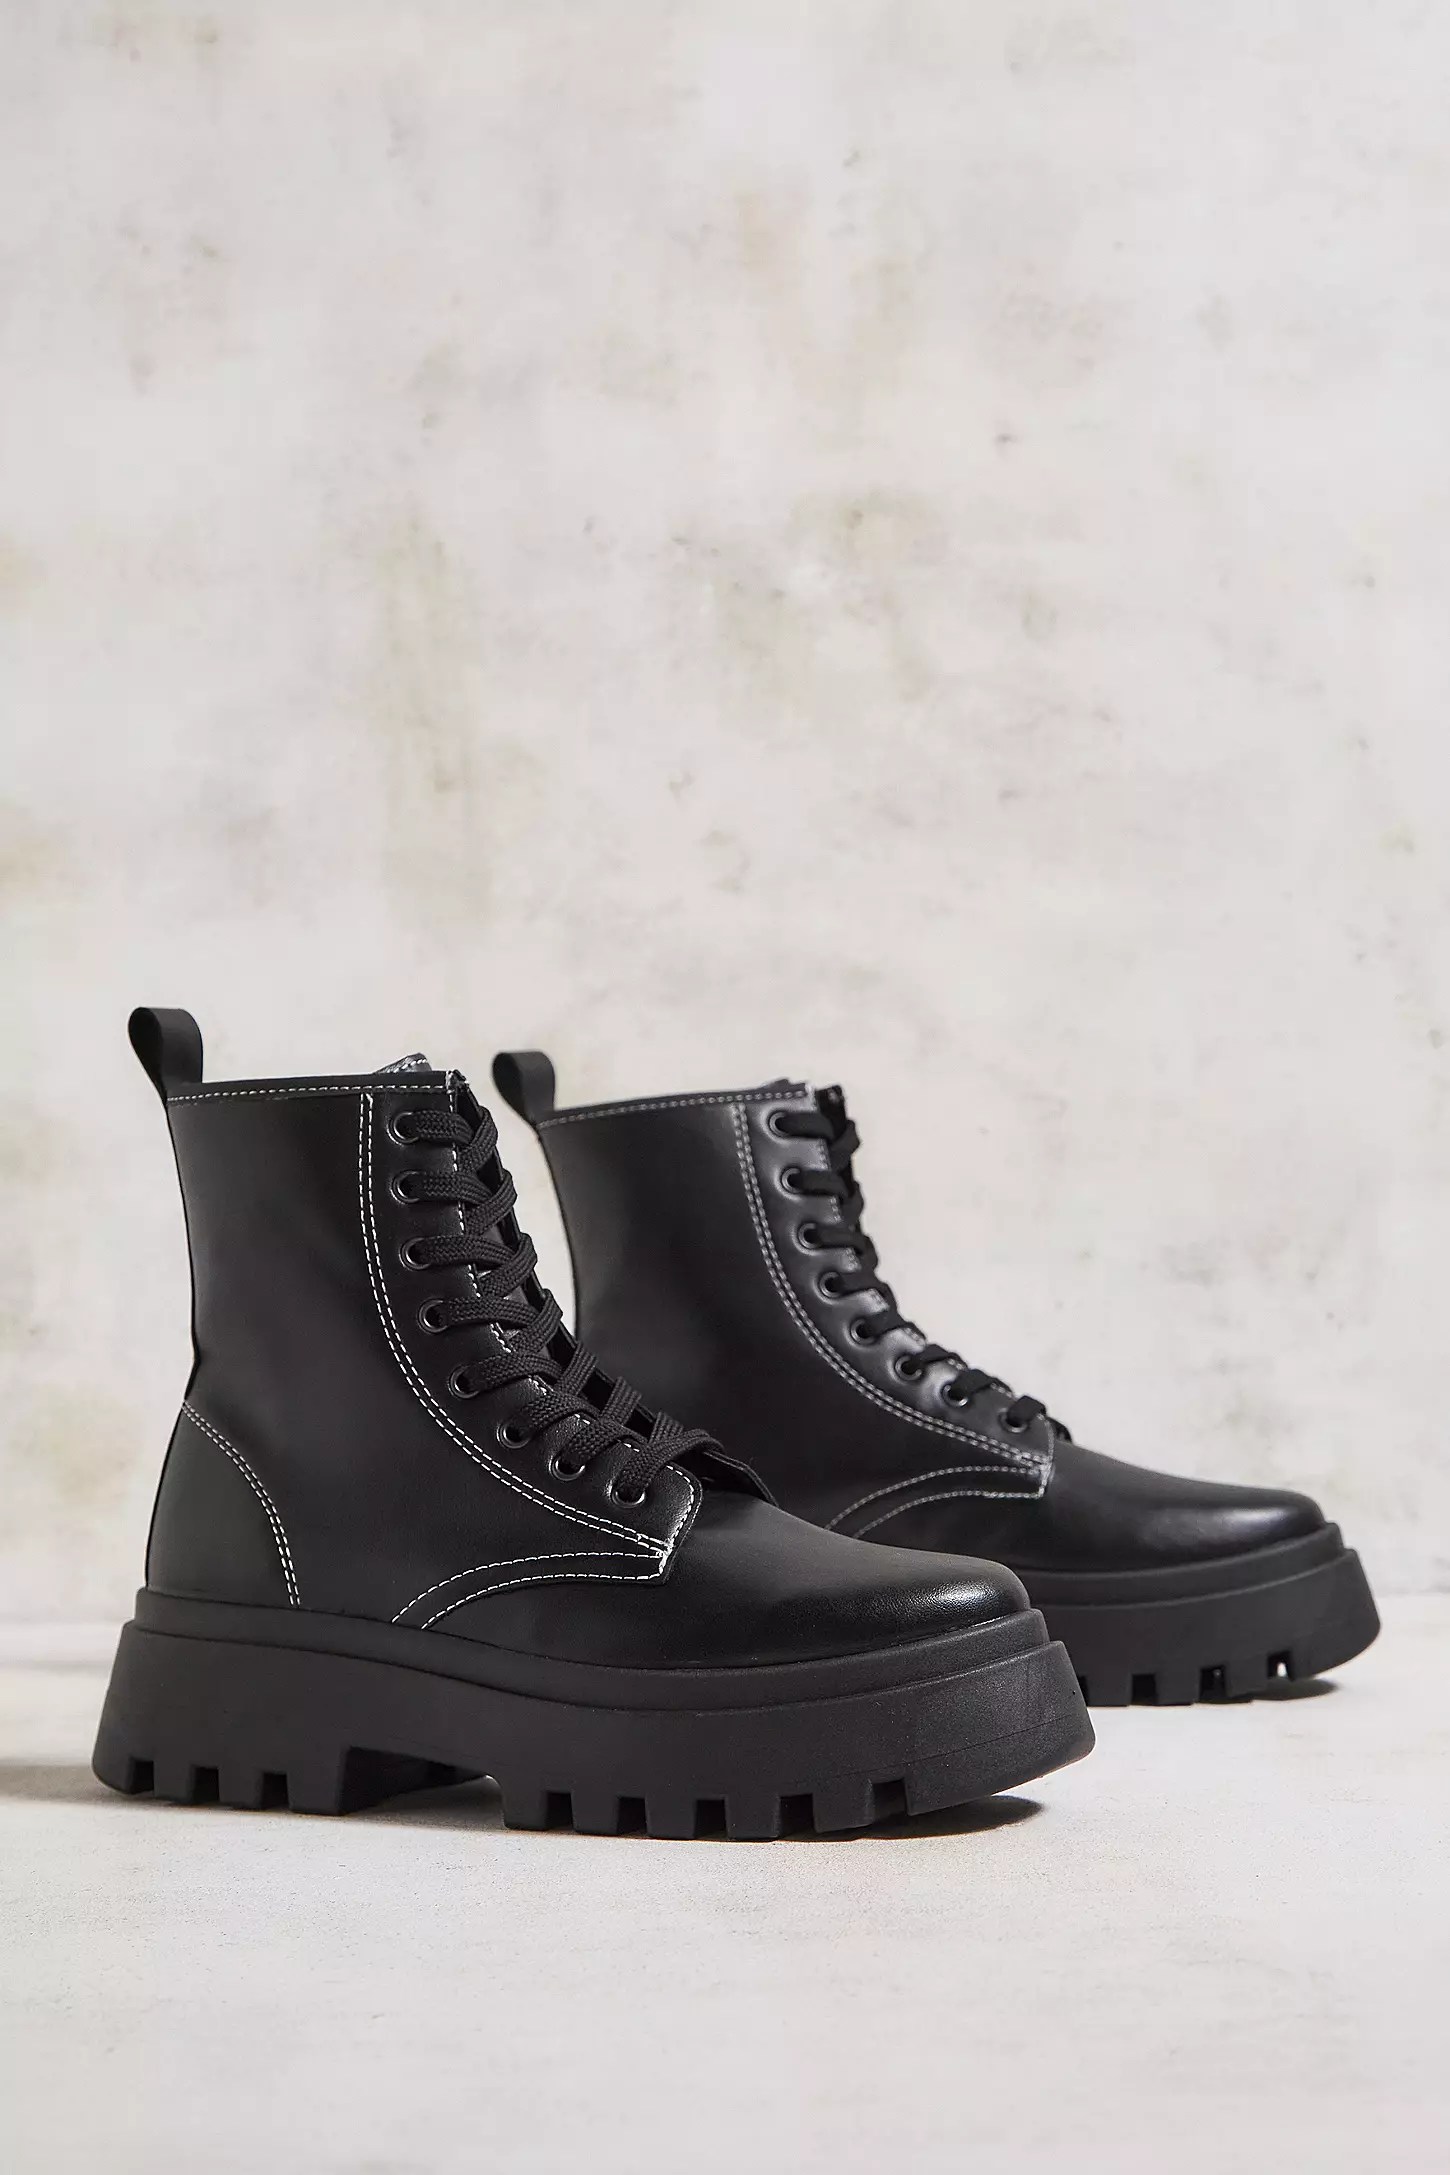 UO True Contrast Stitch Lace-Up Boots, now £49, Urban Outfitters